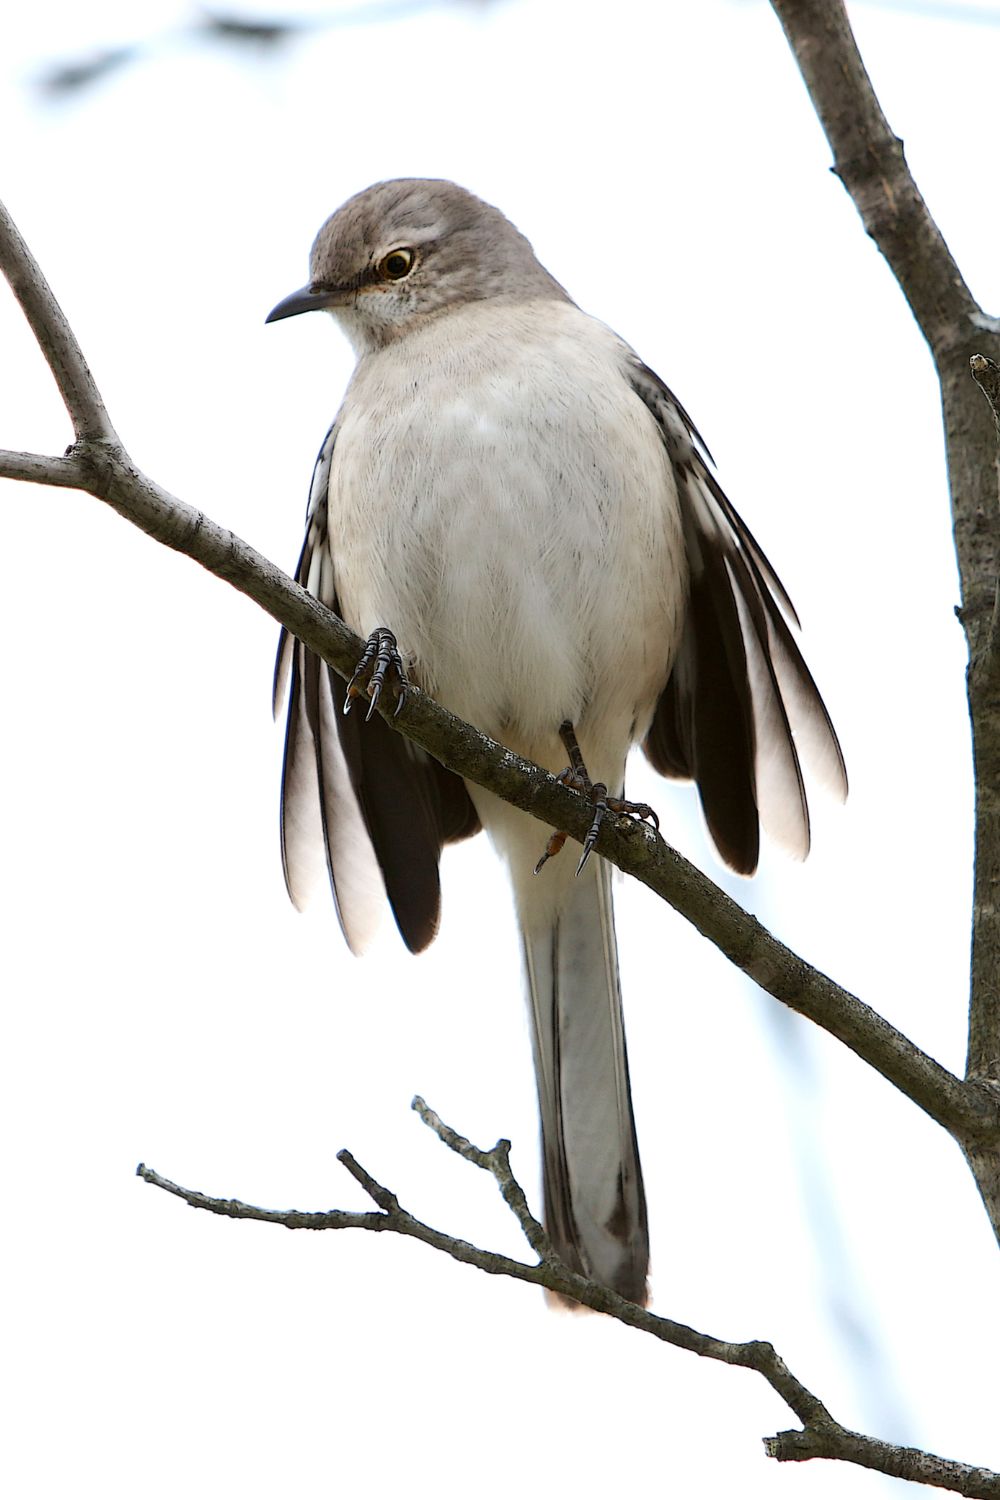 How to attract mockingbirds?